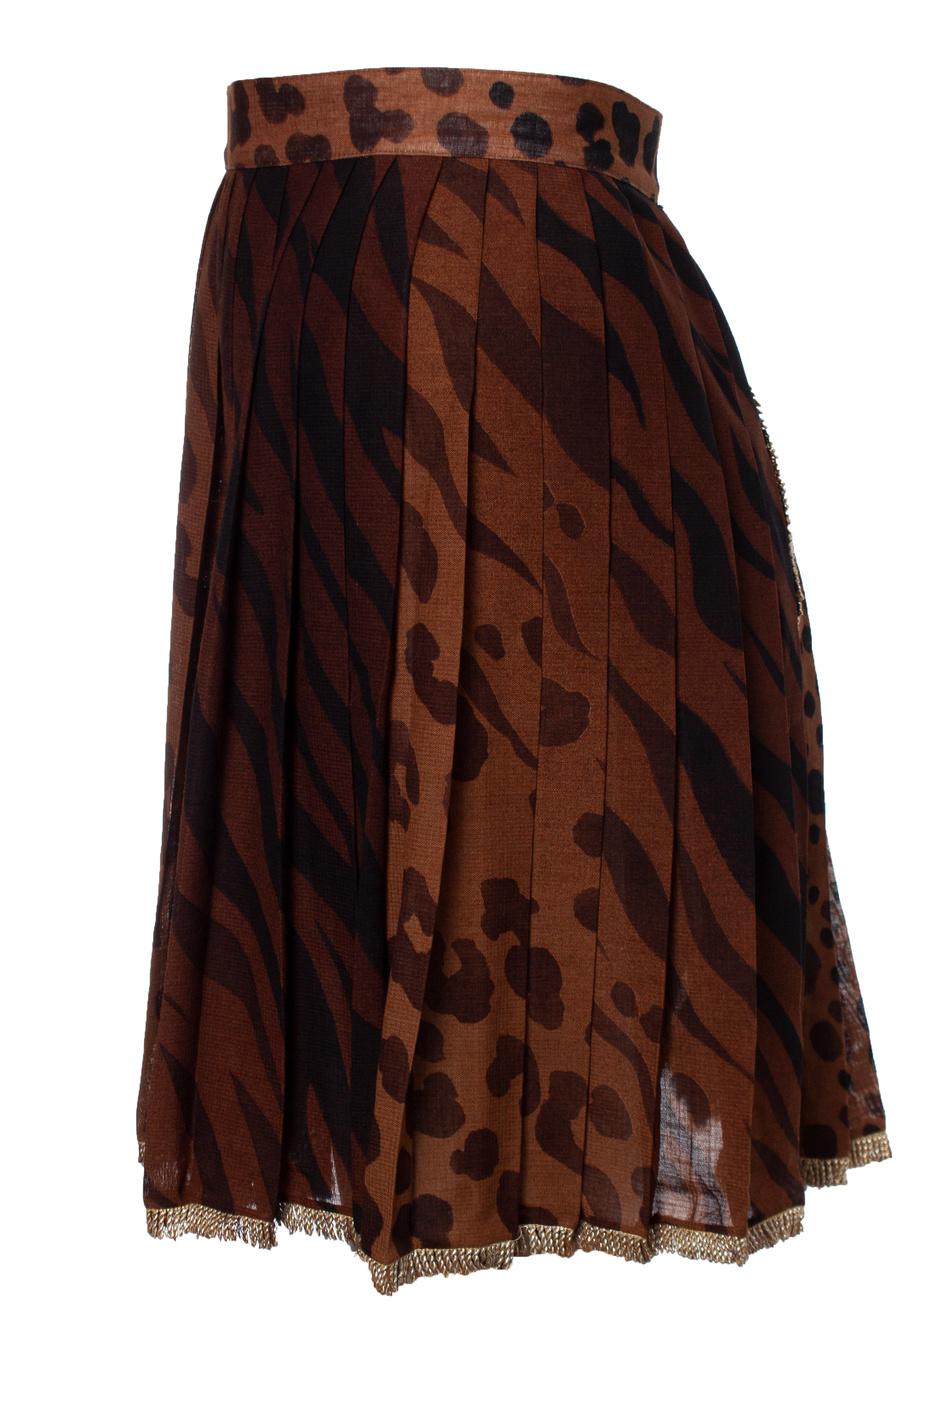 Gianni Versace Couture, Leopard printed and pleated skirt In Excellent Condition For Sale In AMSTERDAM, NL